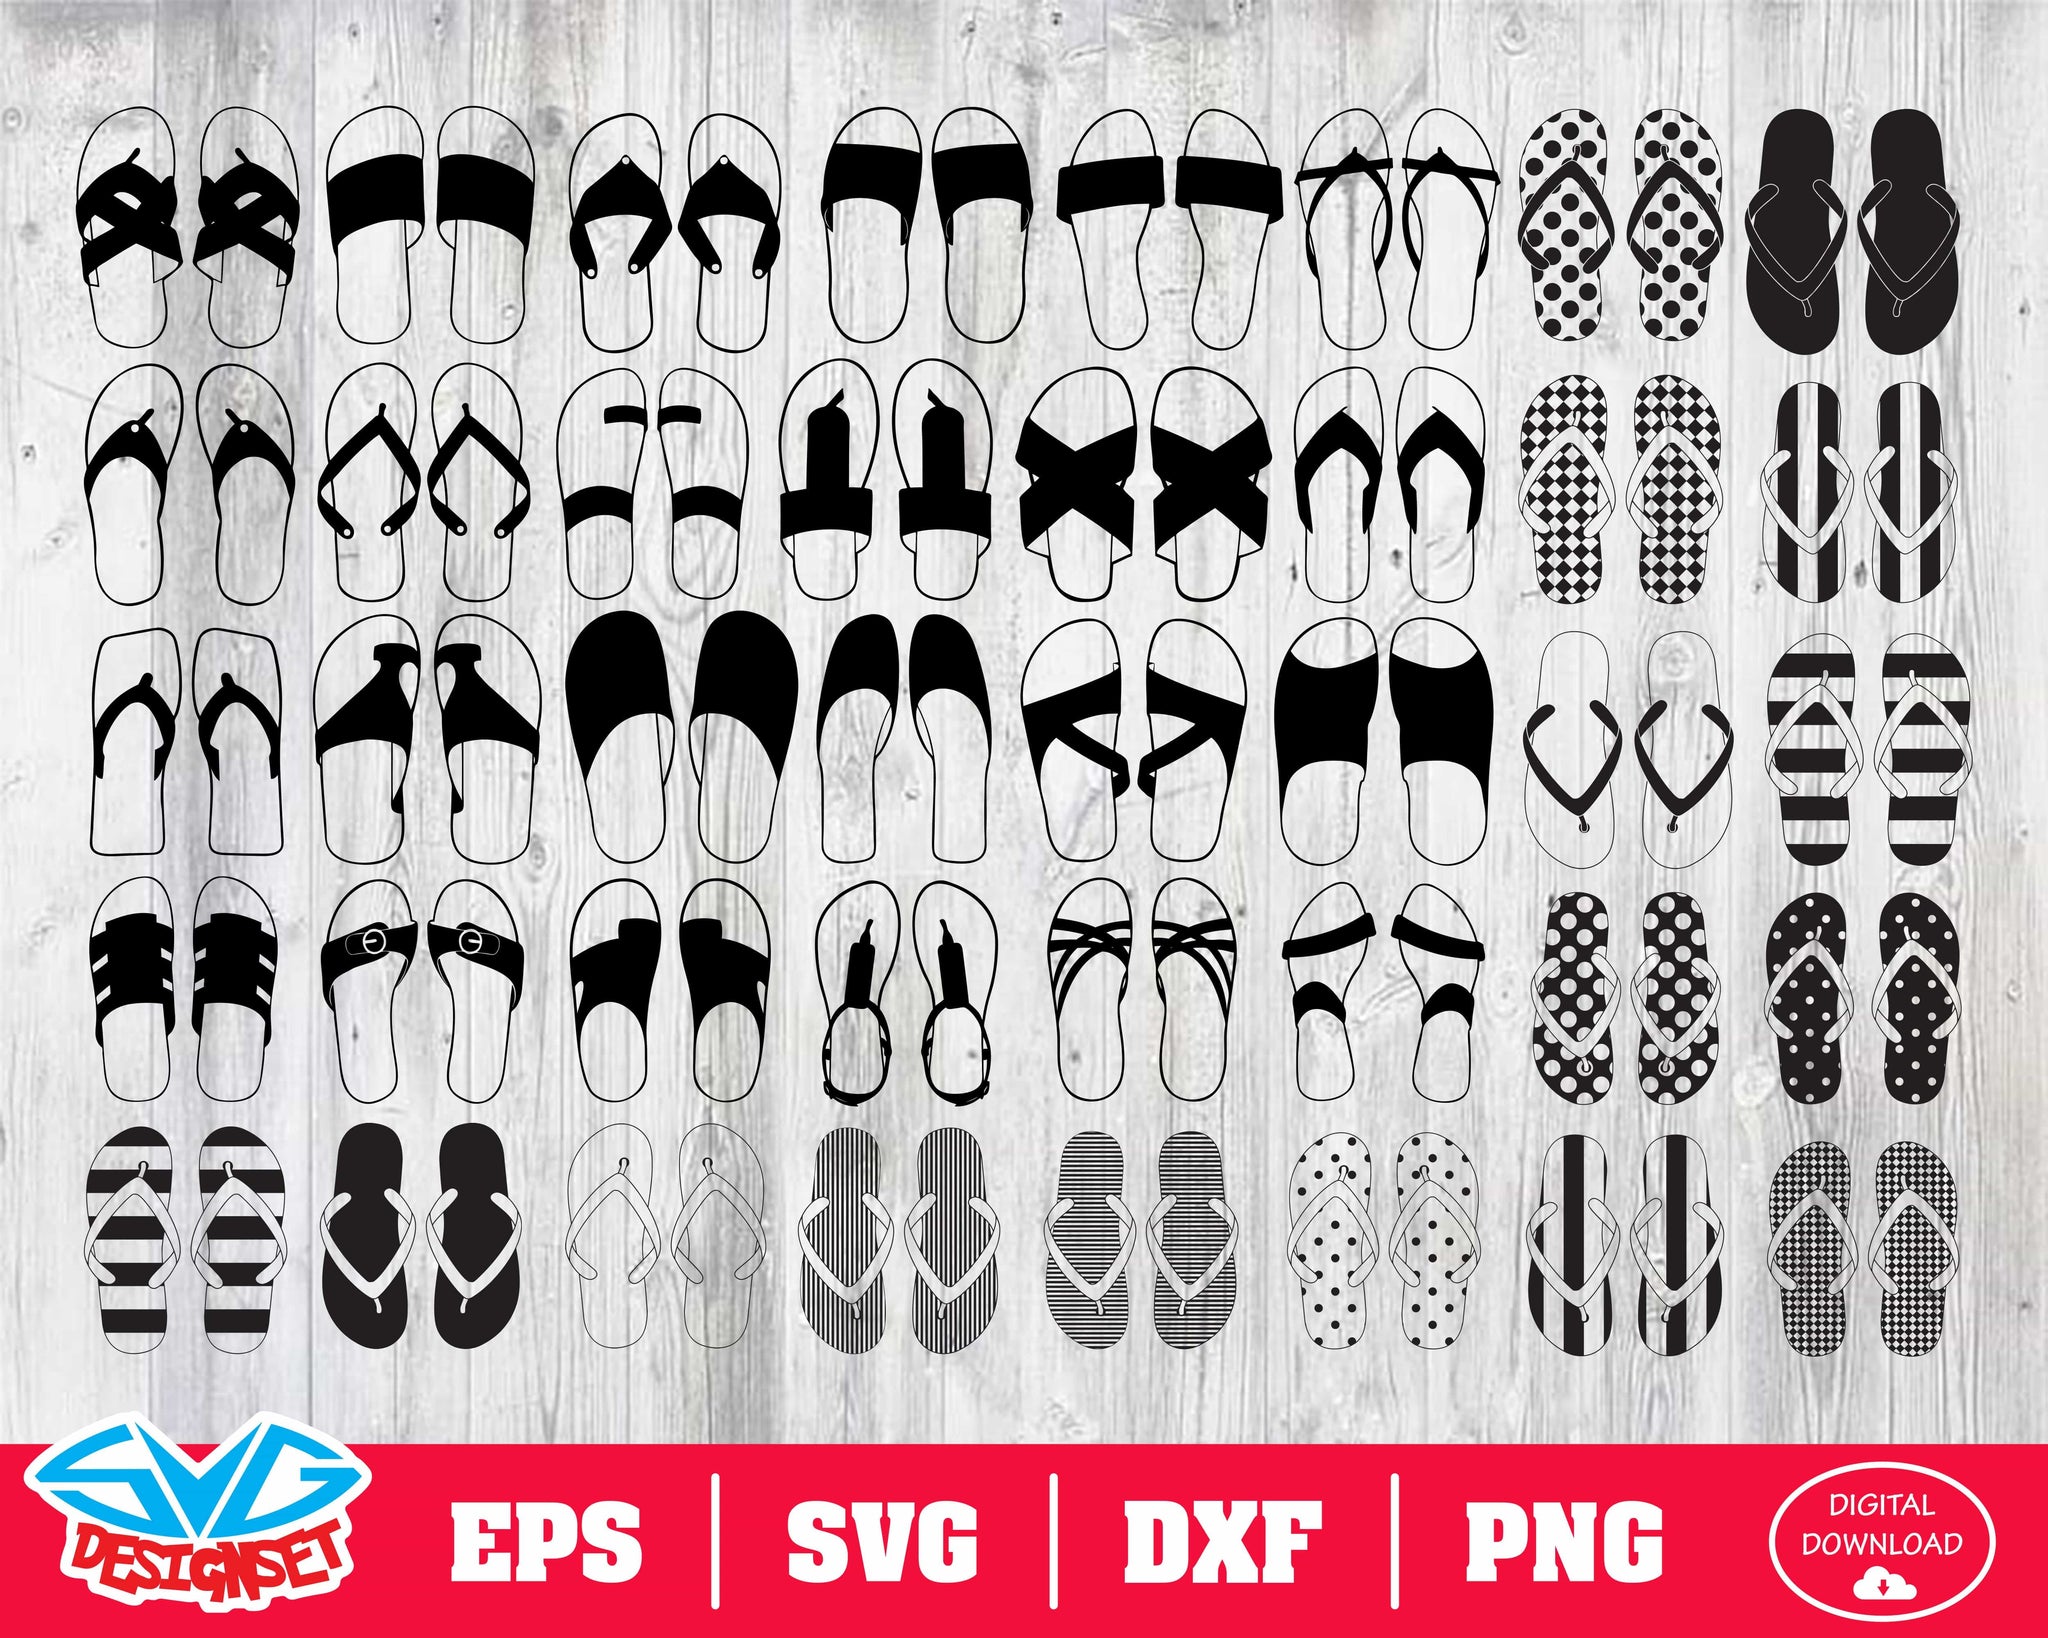 Flip flops Svg, Dxf, Eps, Png, Clipart, Silhouette and Cutfiles - SVGDesignSets